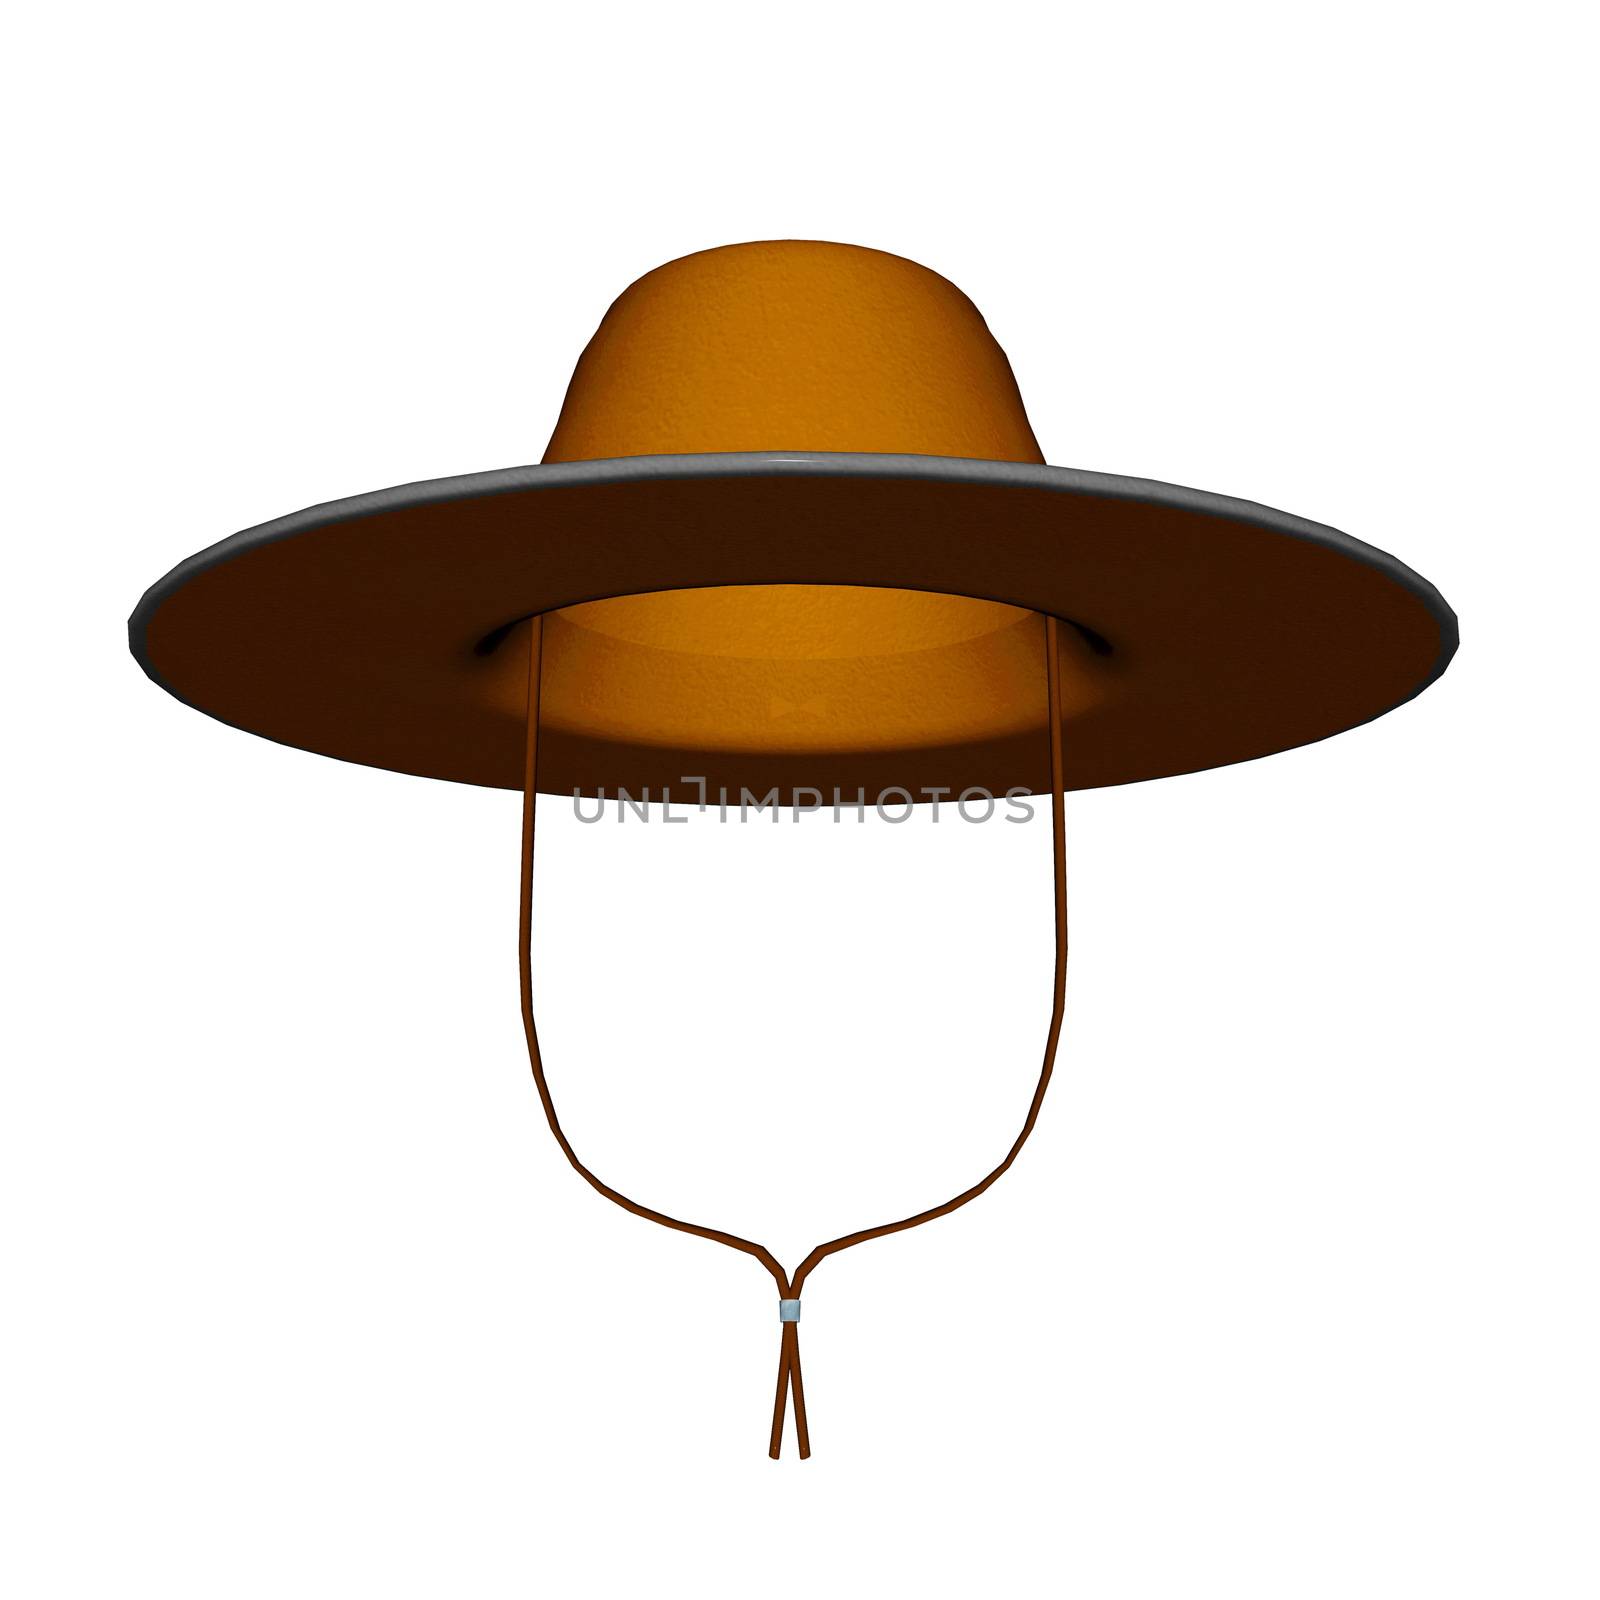 Single cowboy hat isolated in white background